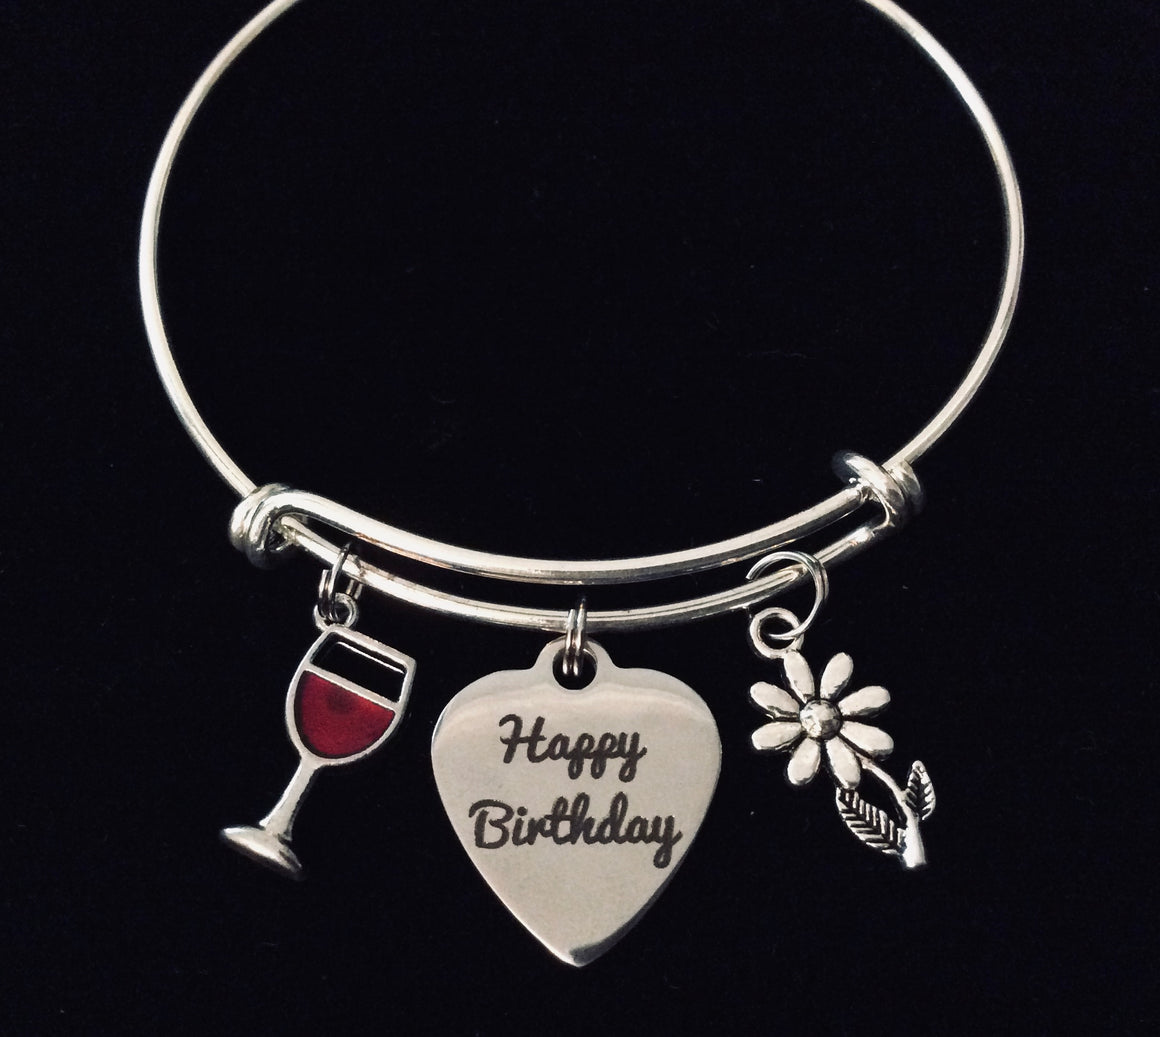 Happy Birthday Expandable Silver Charm Bracelet Adjustable Bangle Red Wine Glass